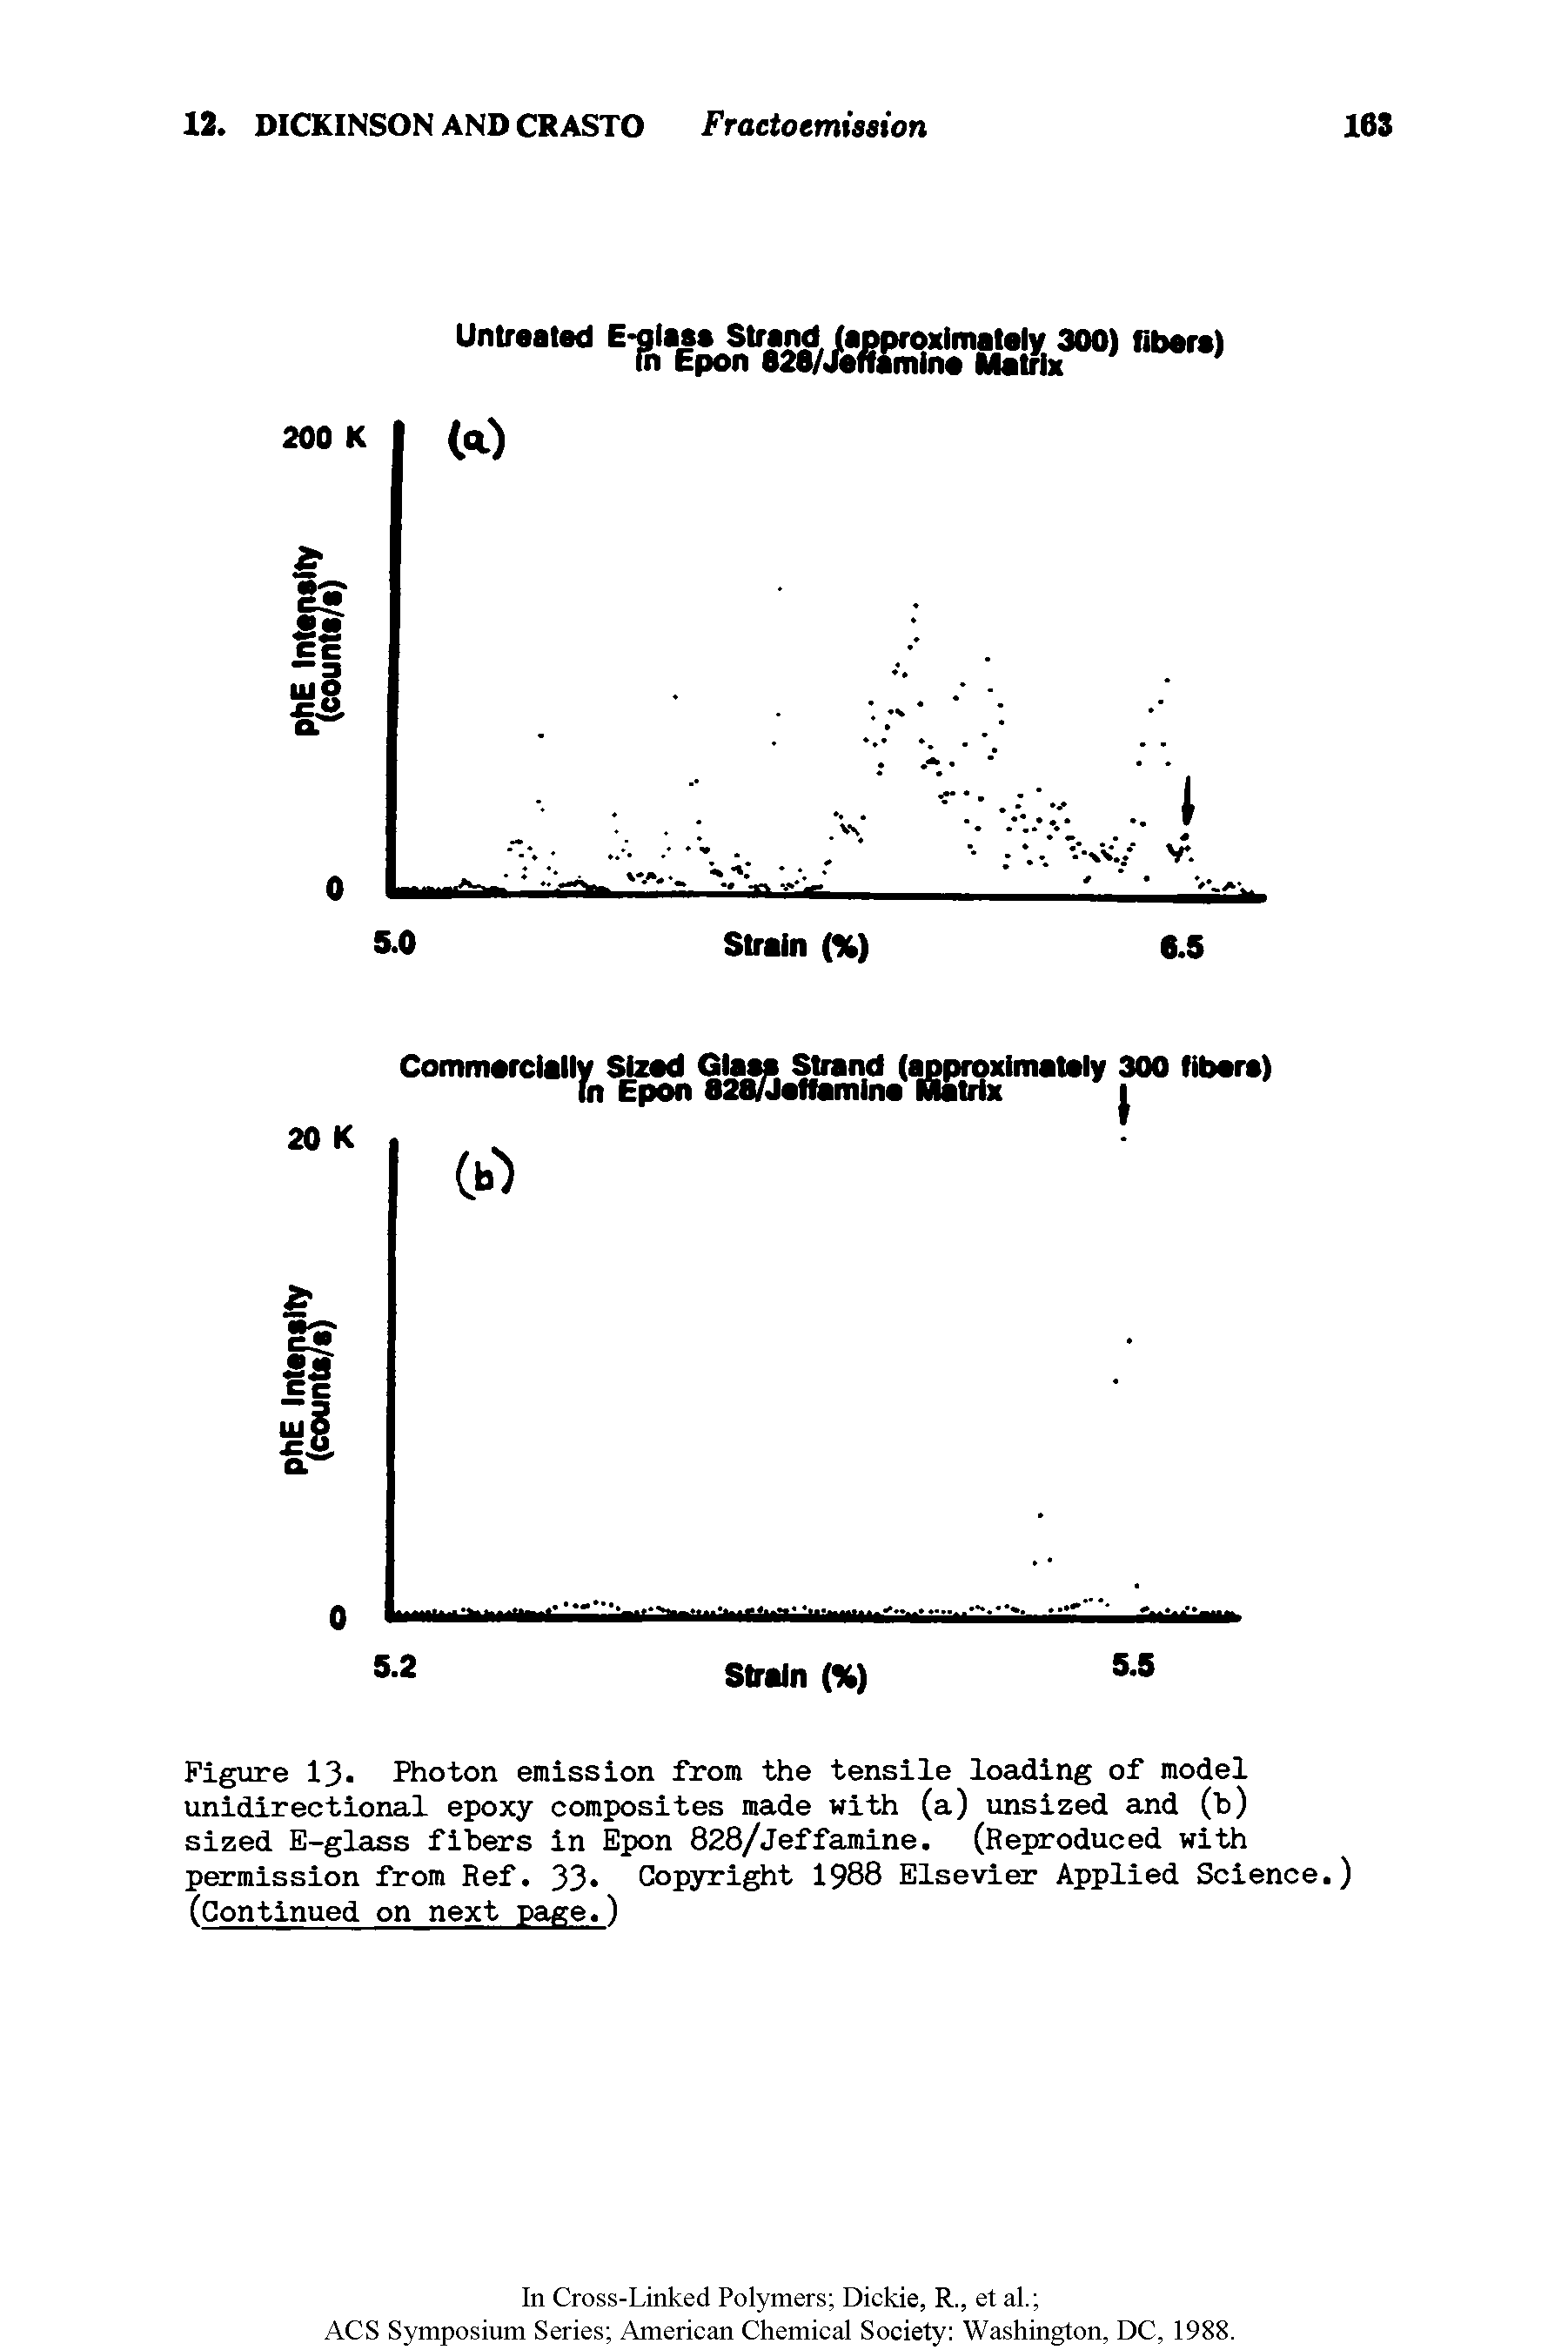 Figure 13. Photon emission from the tensile loading of model unidirectional epoxy composites made with (a) unsized and (b) sized E-glass fibers in Epon 828/Jeffamine. (Reproduced with permission from Ref. 33 Copyright 1988 Elsevier Applied Science.) (Continued on next page.)...